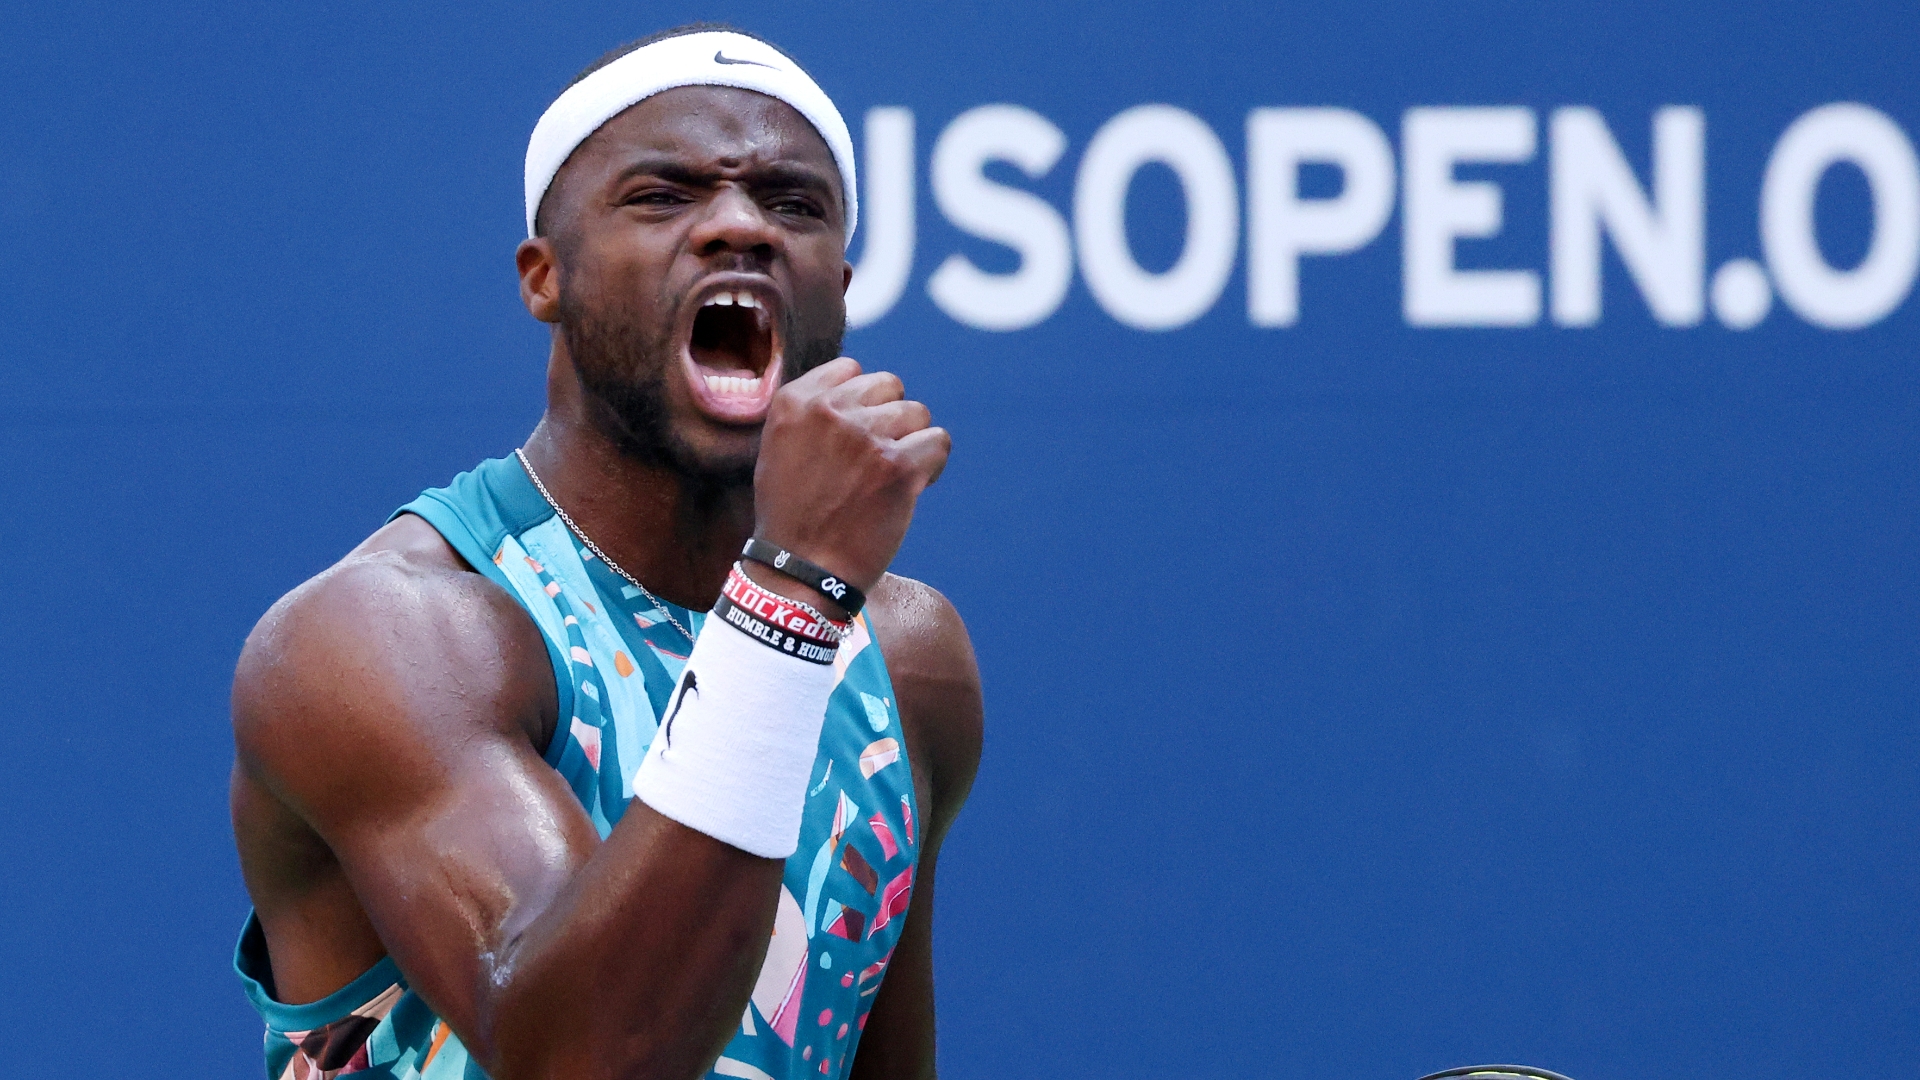 Frances Tiafoe takes the first set with an ace - Stream the Video